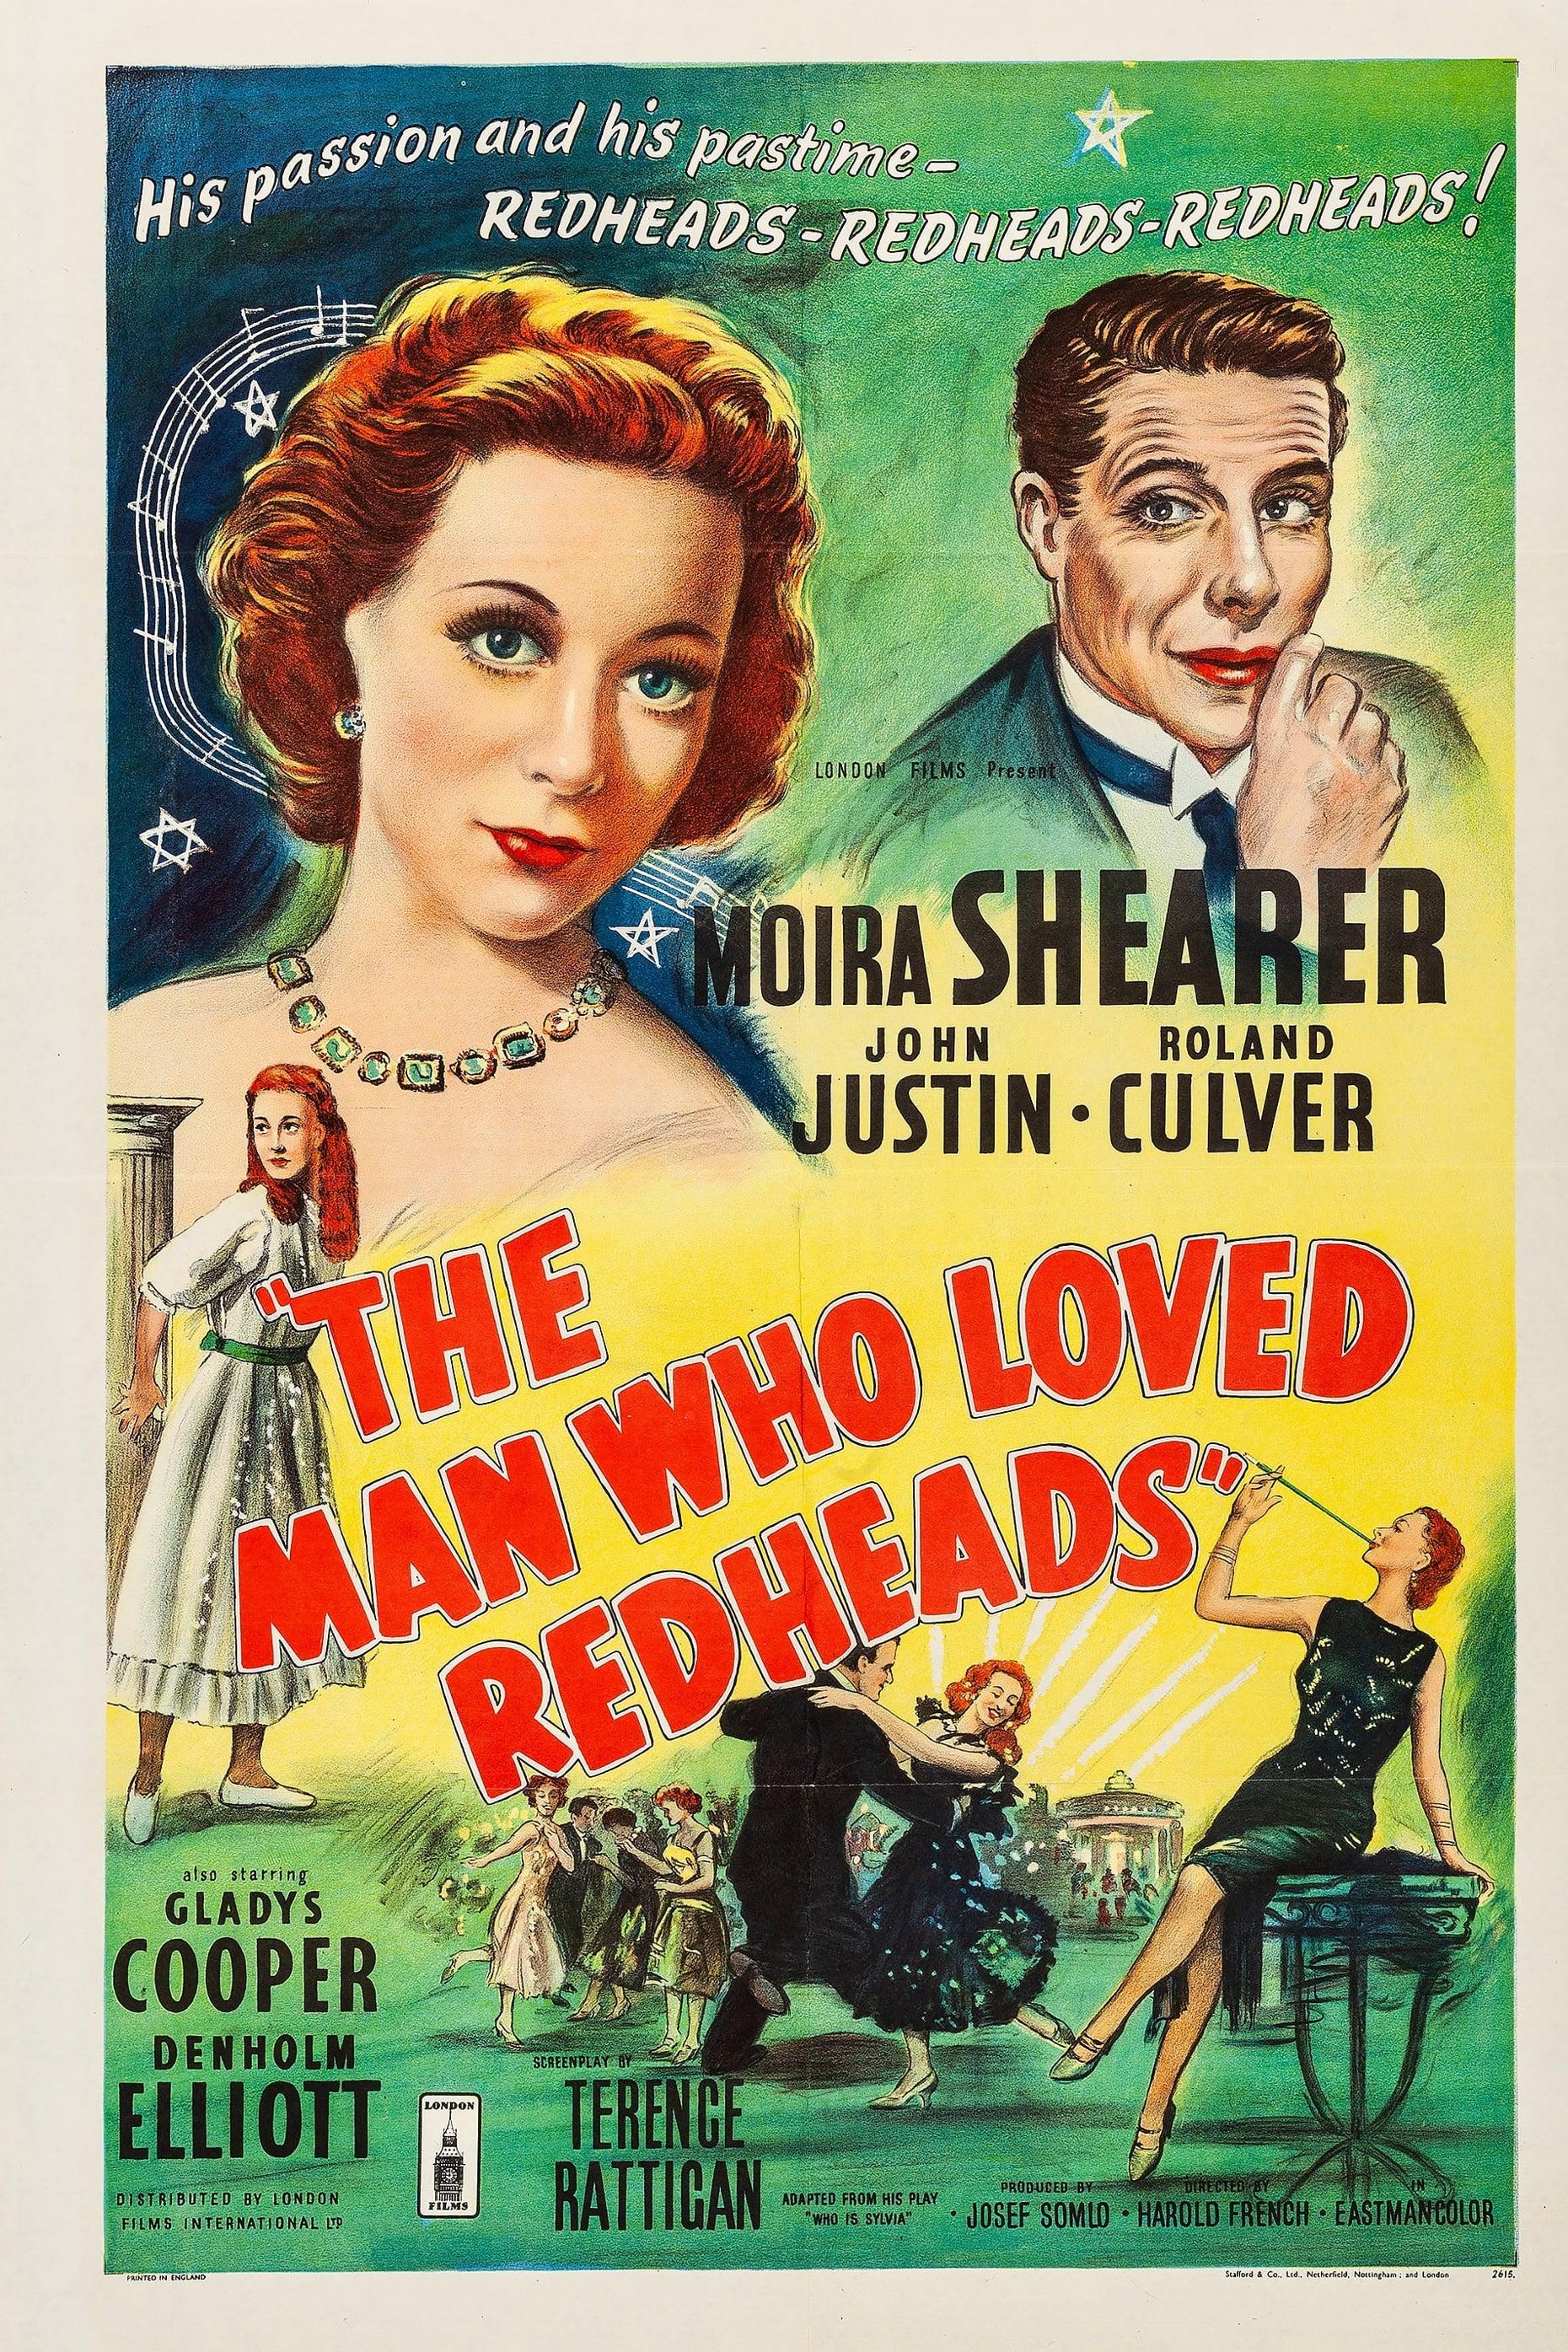 The Man Who Loved Redheads poster